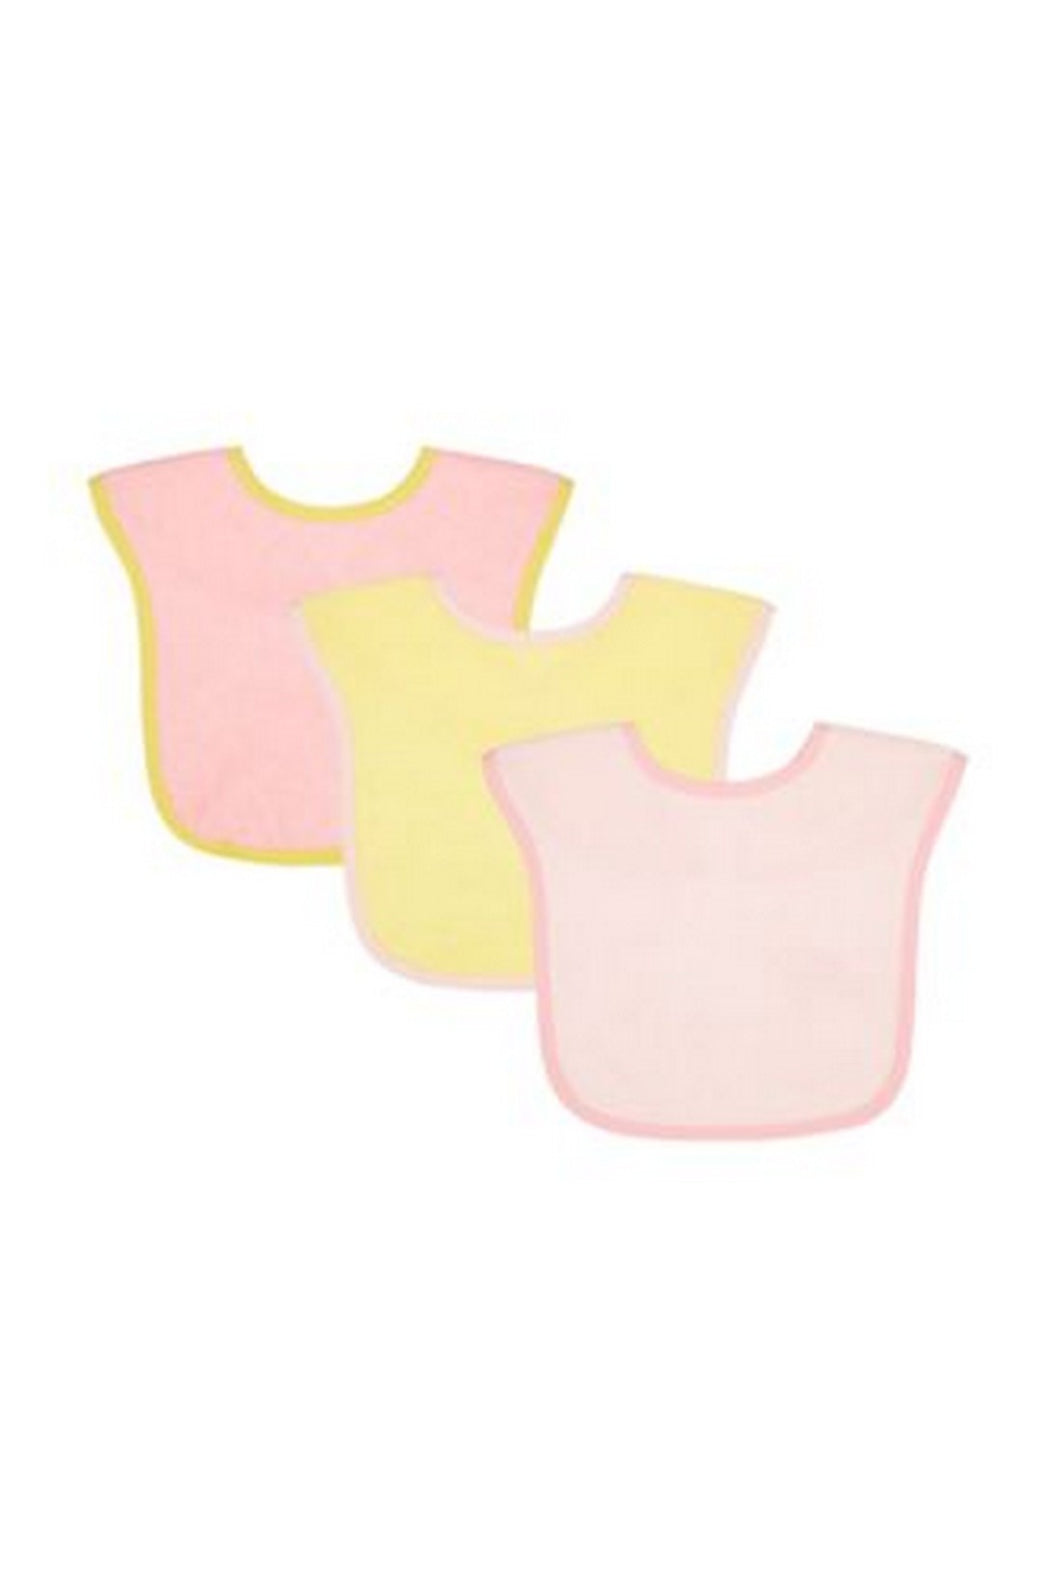 Mothercare Pink Towelling Bibs 3 Pack 3 1